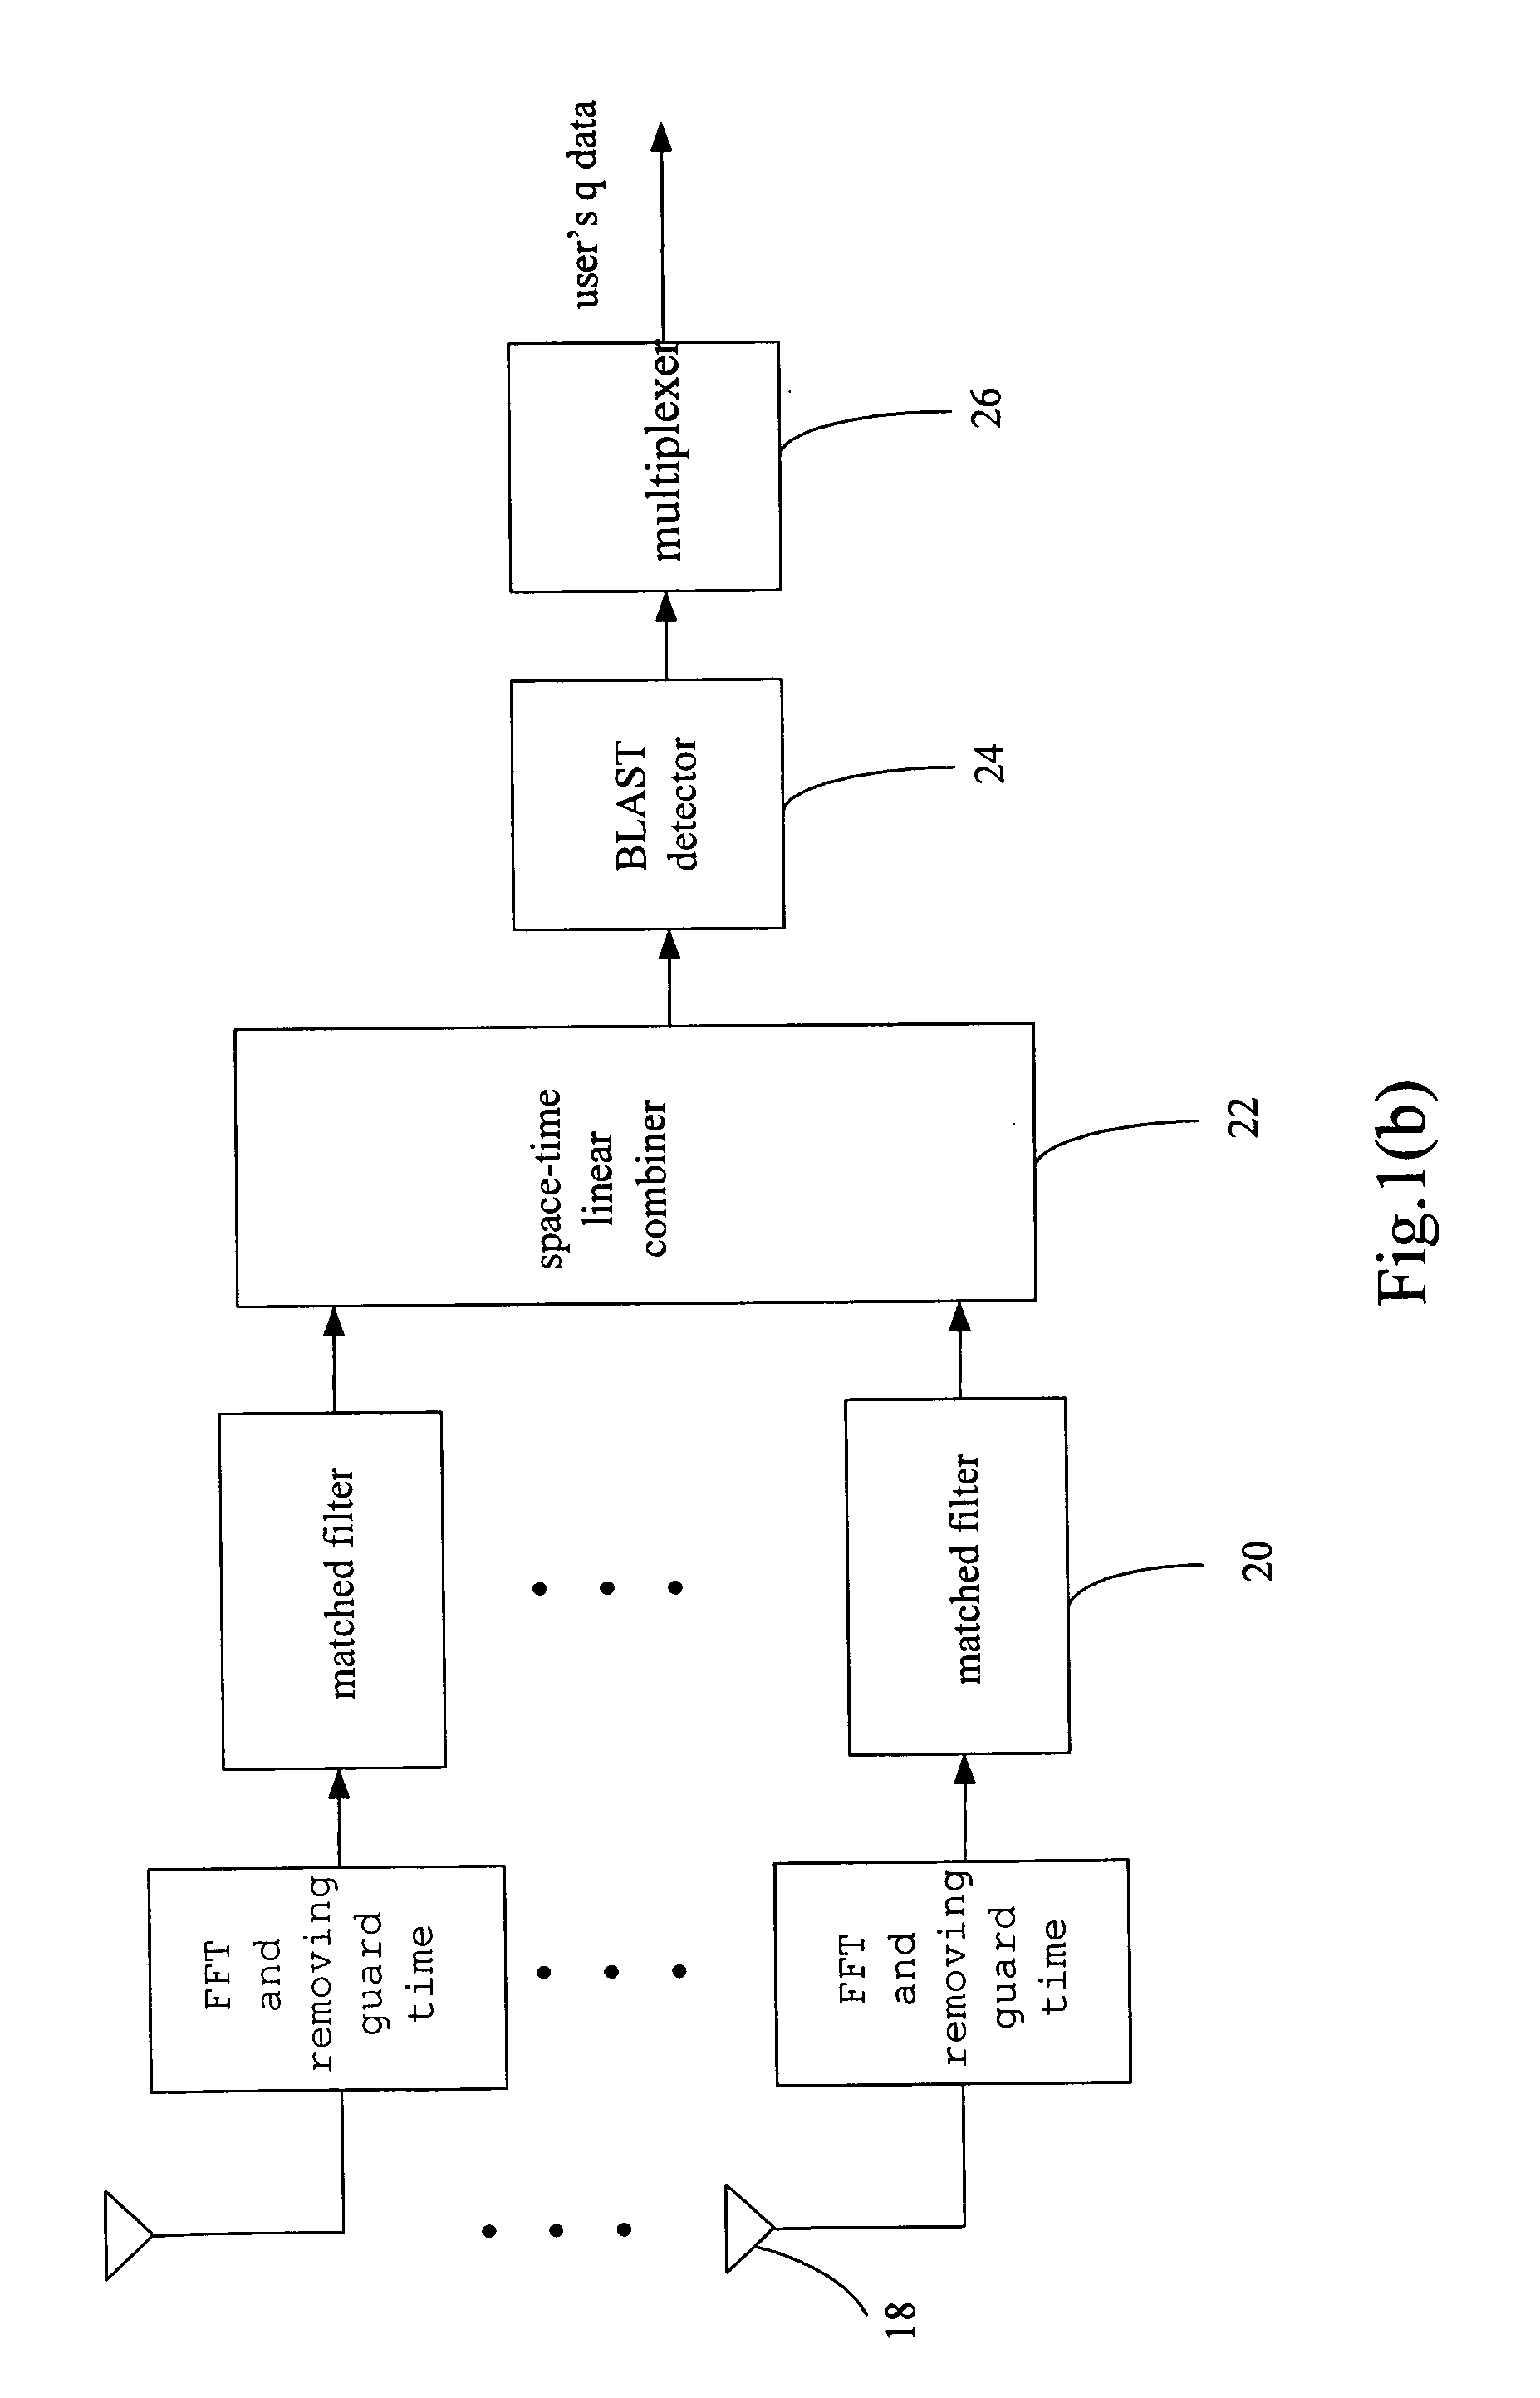 Structure of a multi-input multi-output multicarrier code division multiple access communication system and communication method thereof